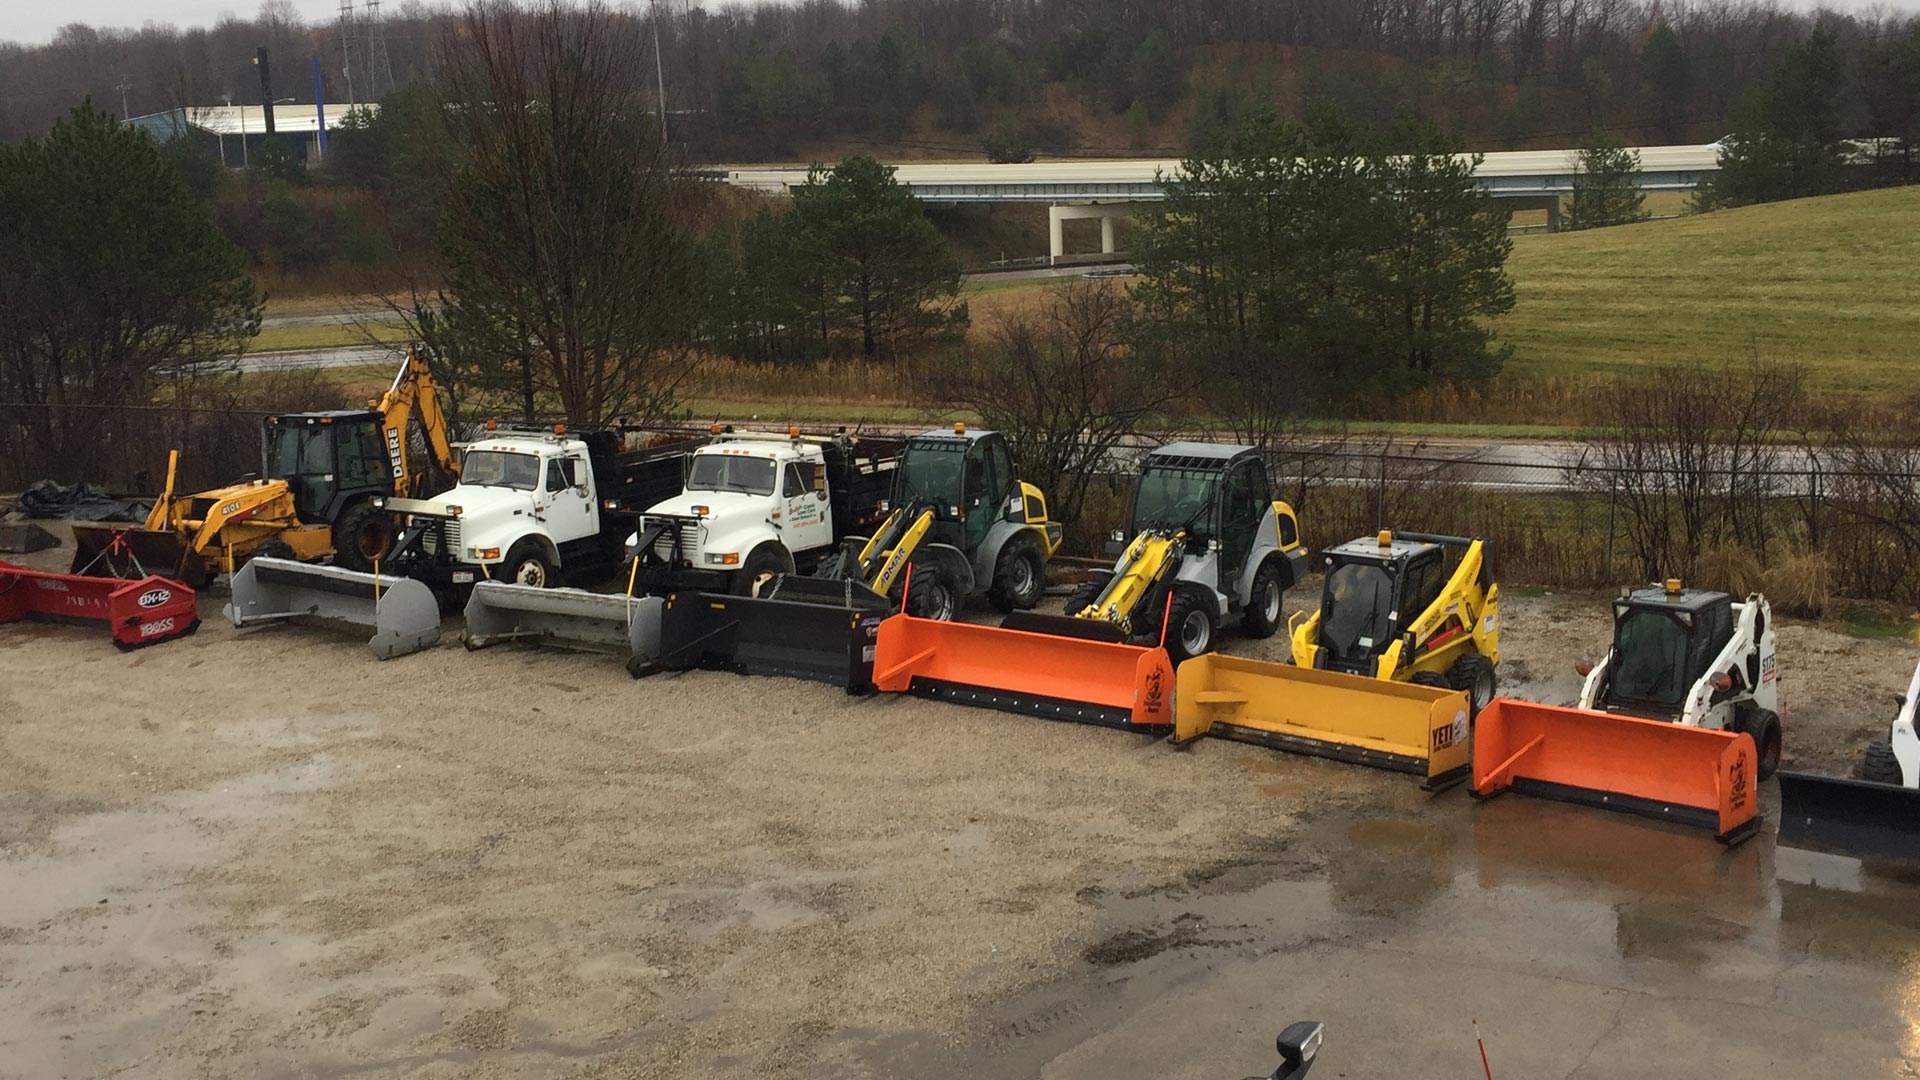 Our fleet of trucks our employees use in Ashtabula and surrounding areas.